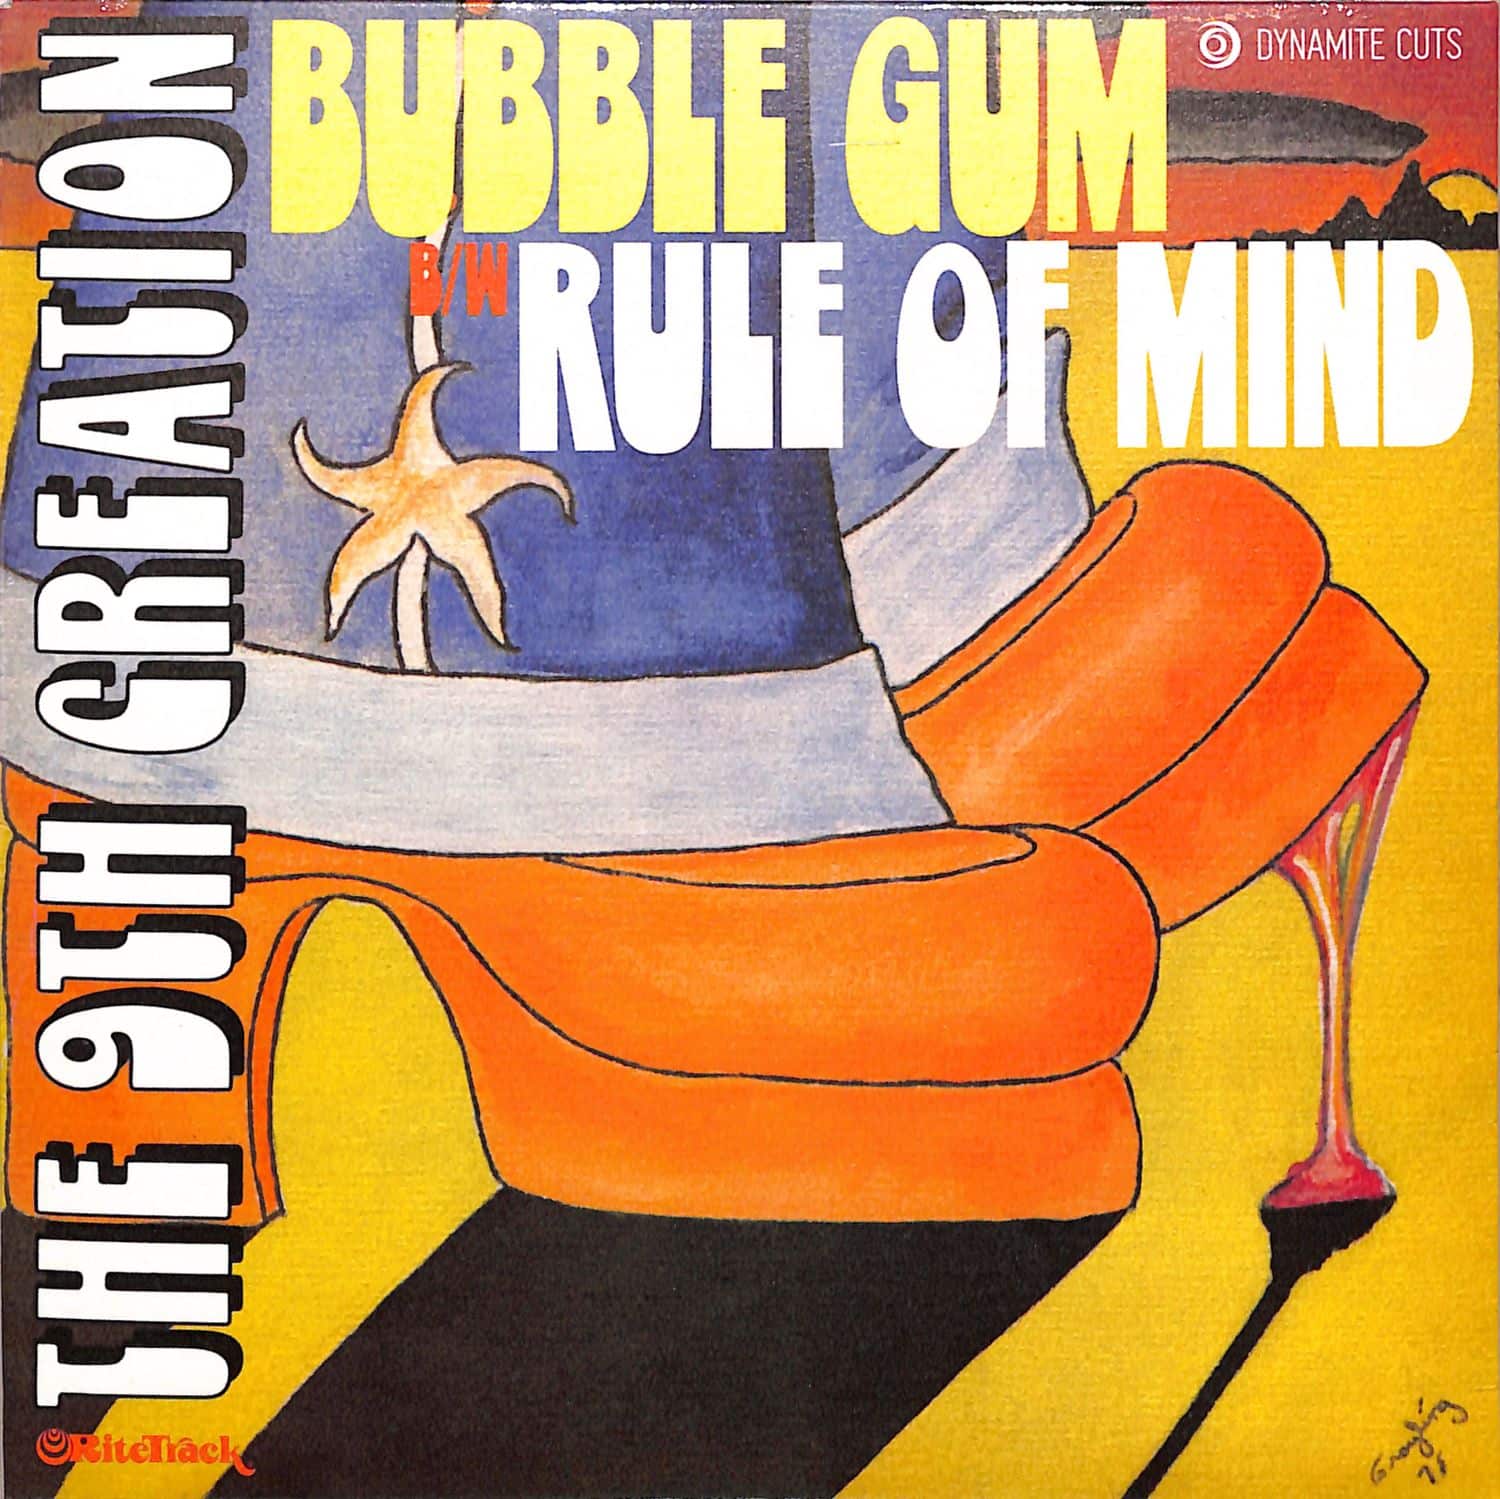 The 9th Creation - BUBBLE GUM / RULE OF MIND 